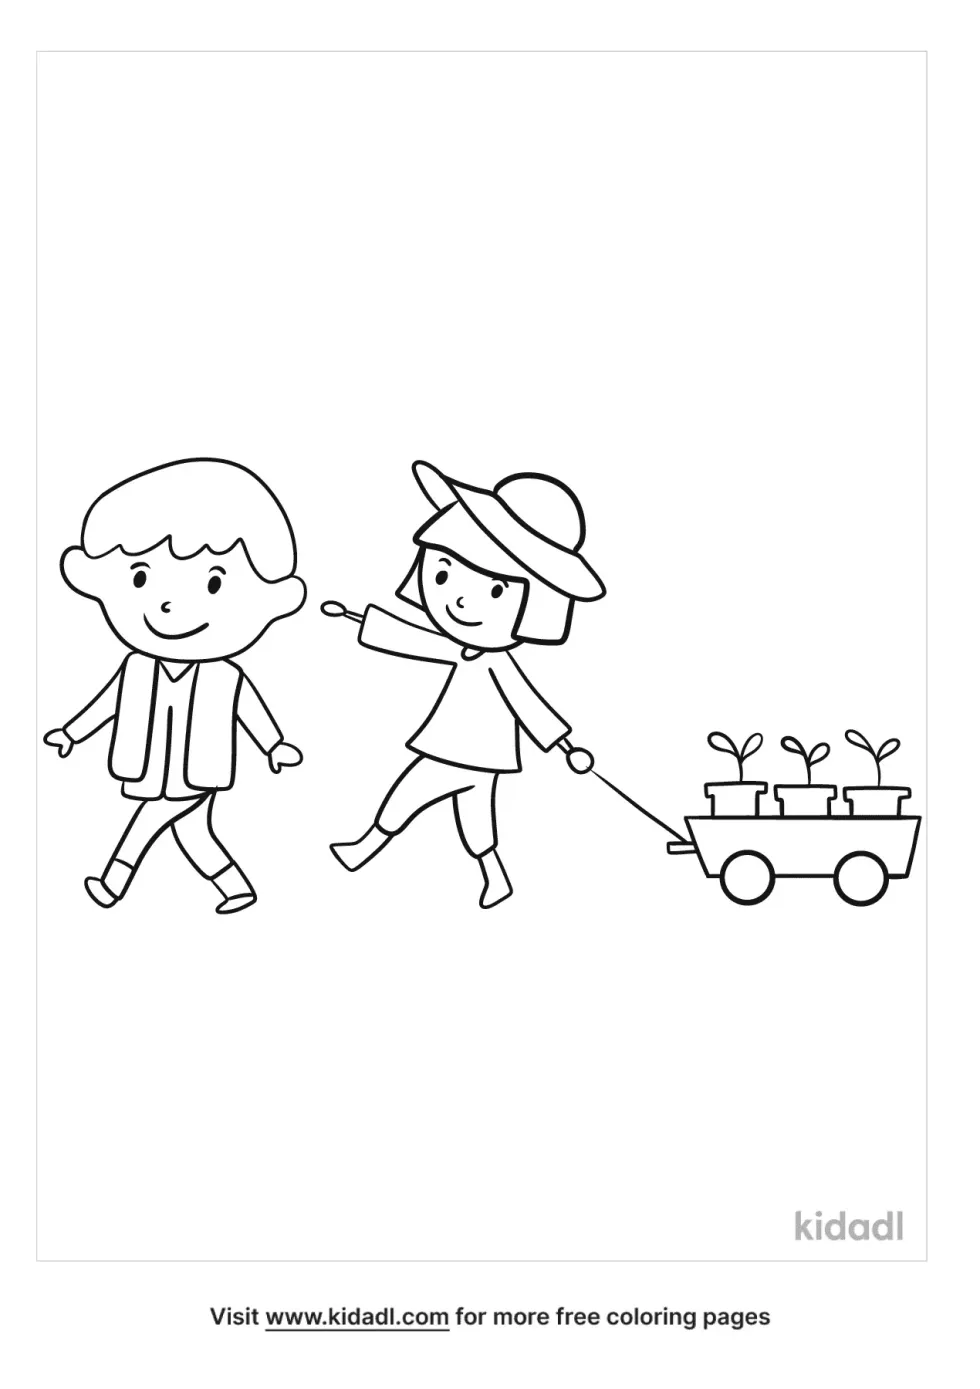 Kids Pulling Wagon Coloring Page